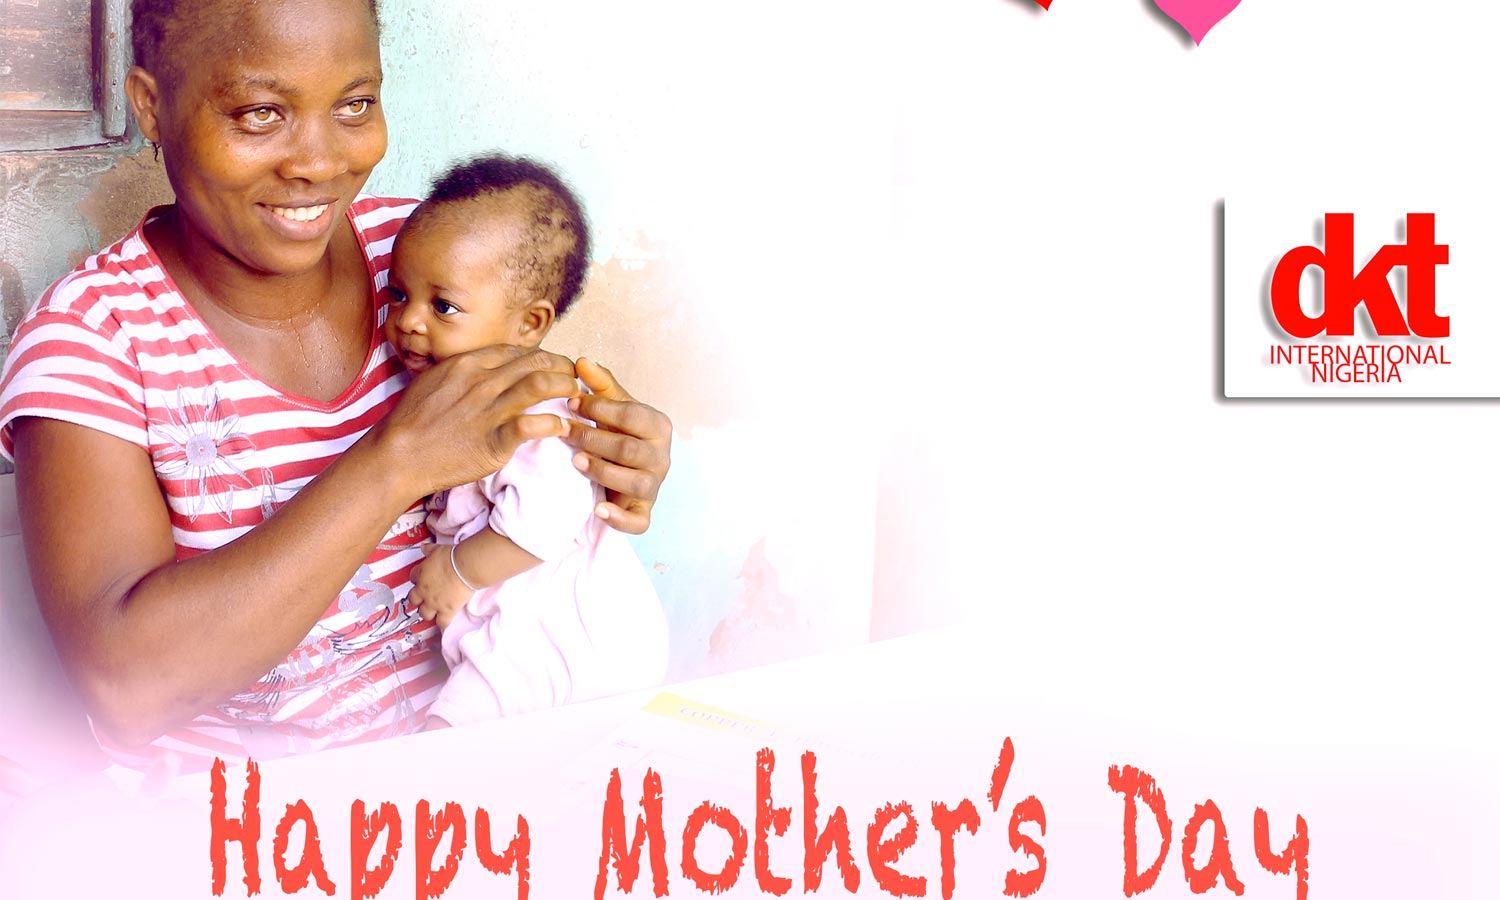 No Mother’s Day for Thousands in Nigeria!